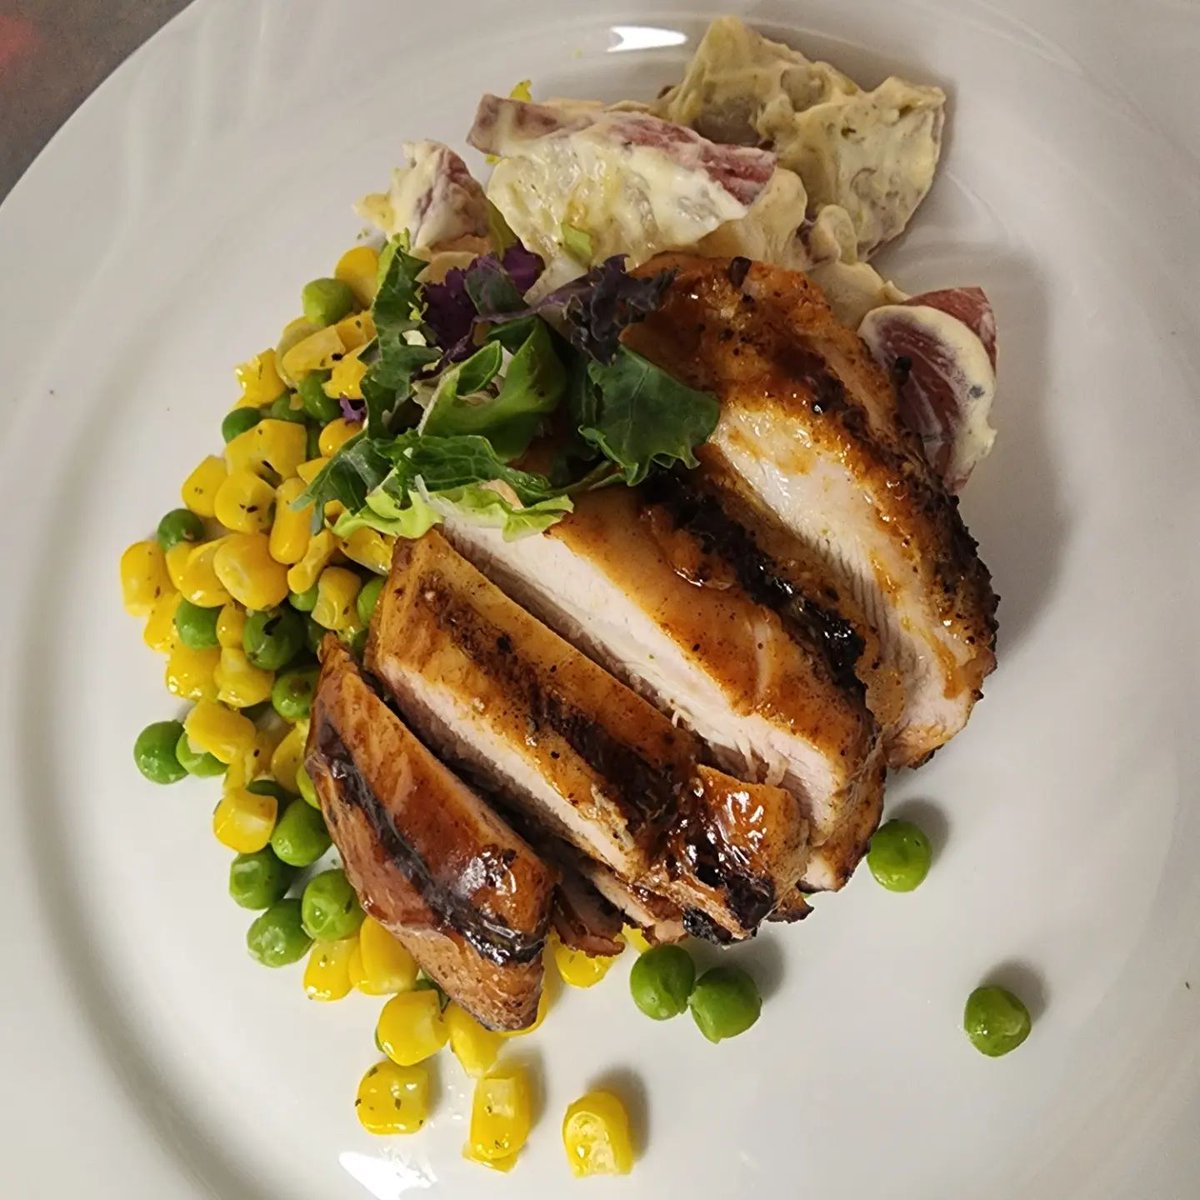 Barbecue chicken thighs with potato and corn salad anyone? Yes please! Join us for lunch anytime! Call 502-257-9485 to schedule!
#culinarymasters
#TrilogyLiving